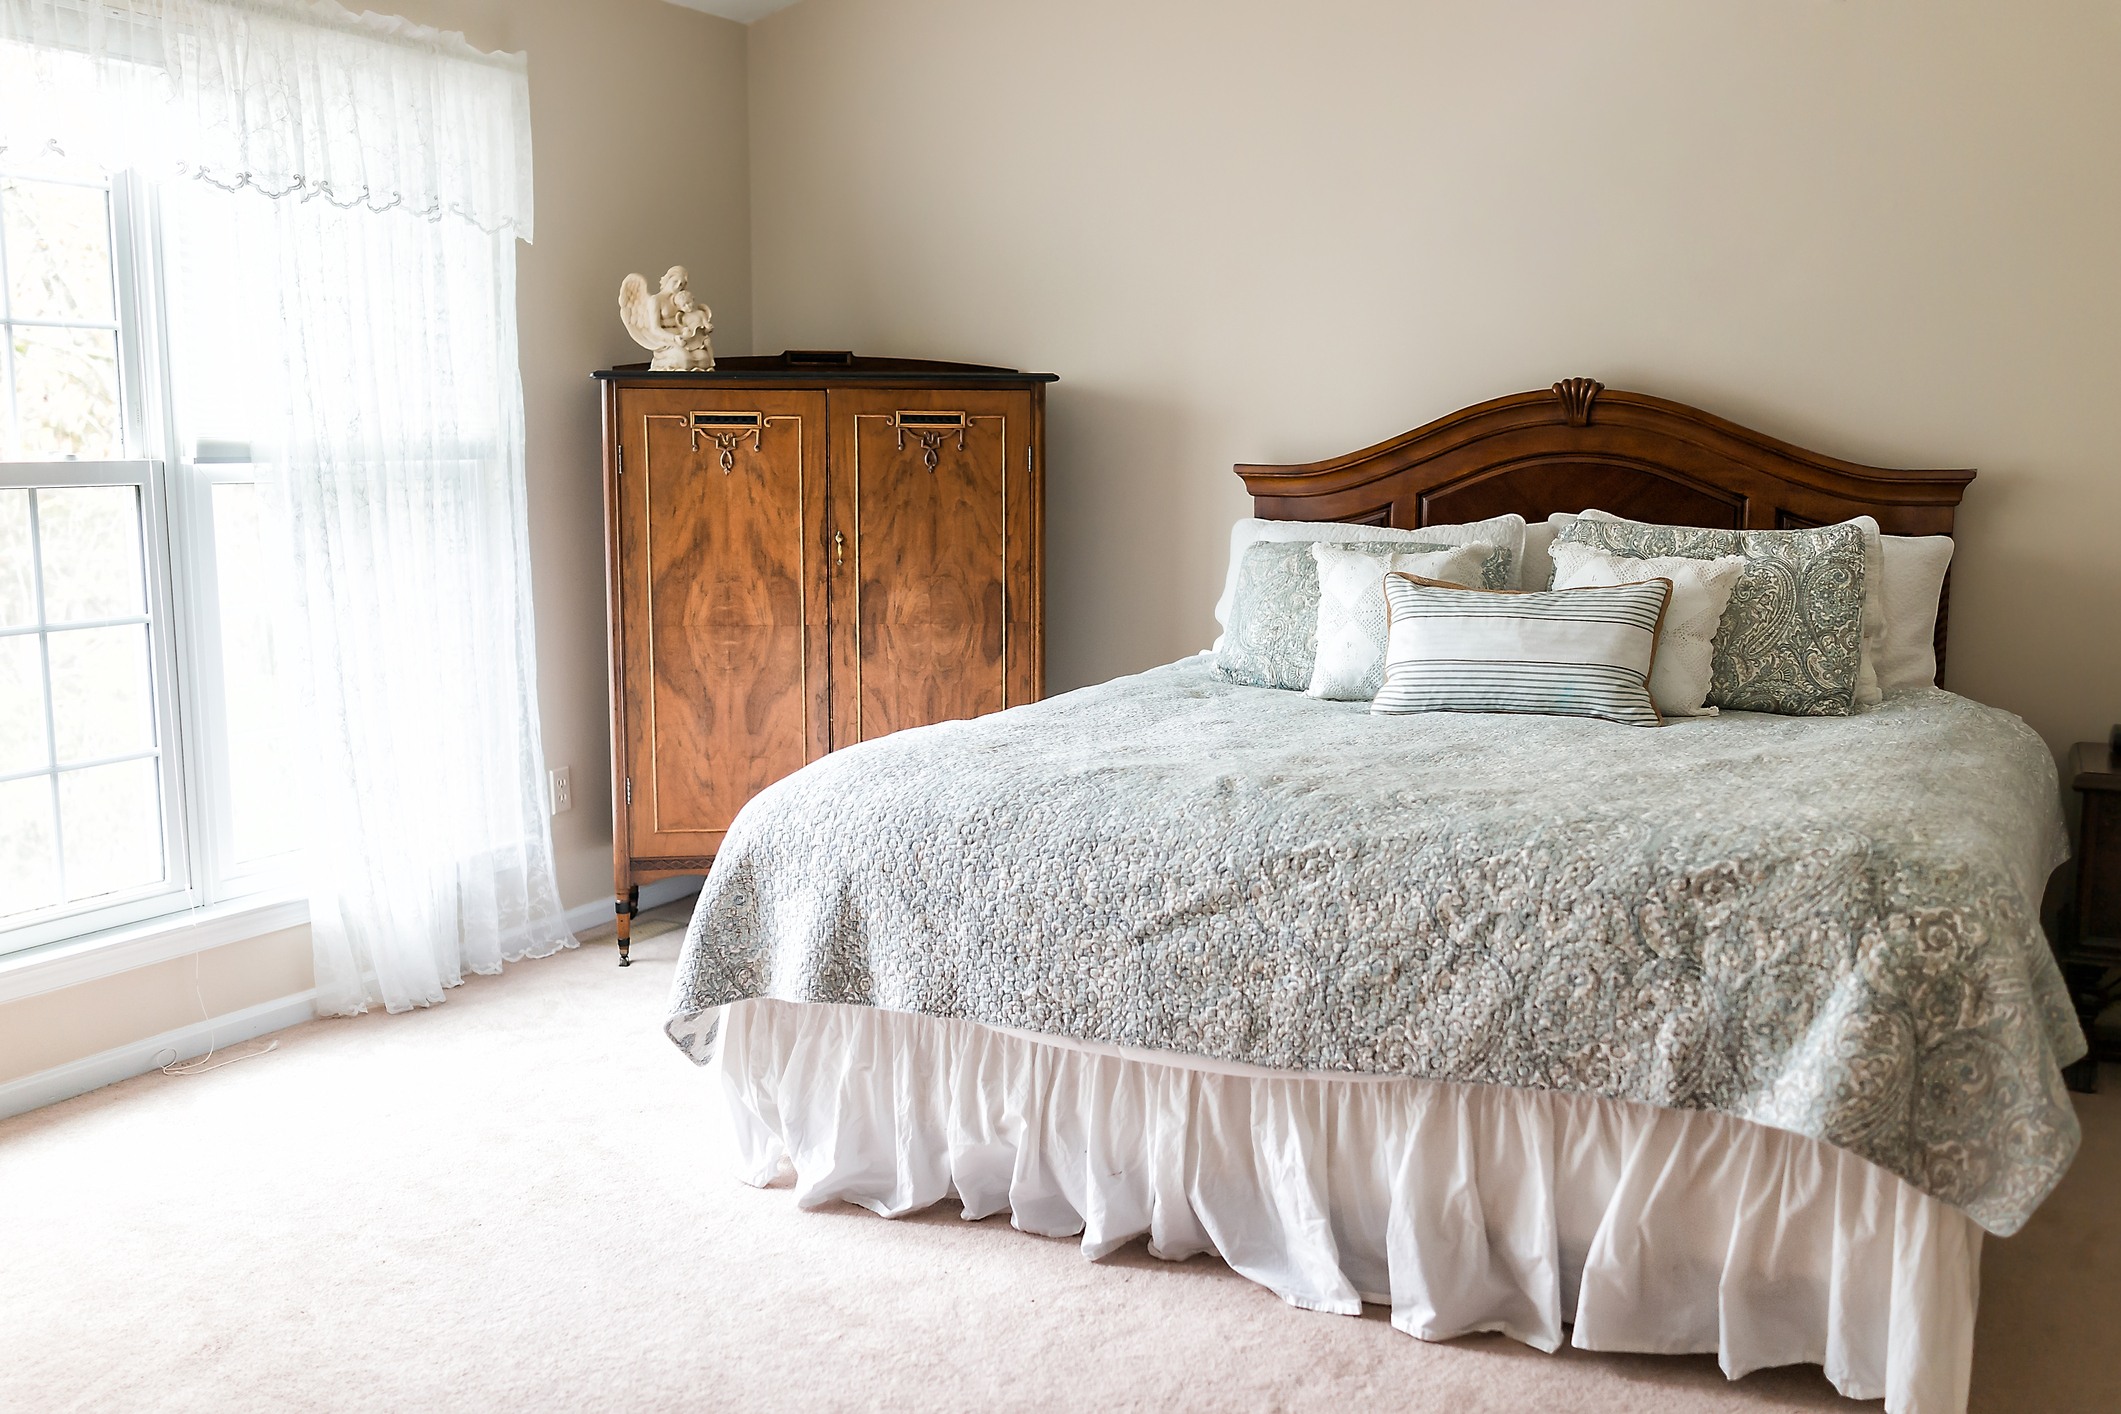 Dated bedroom with ruffle bed skirt